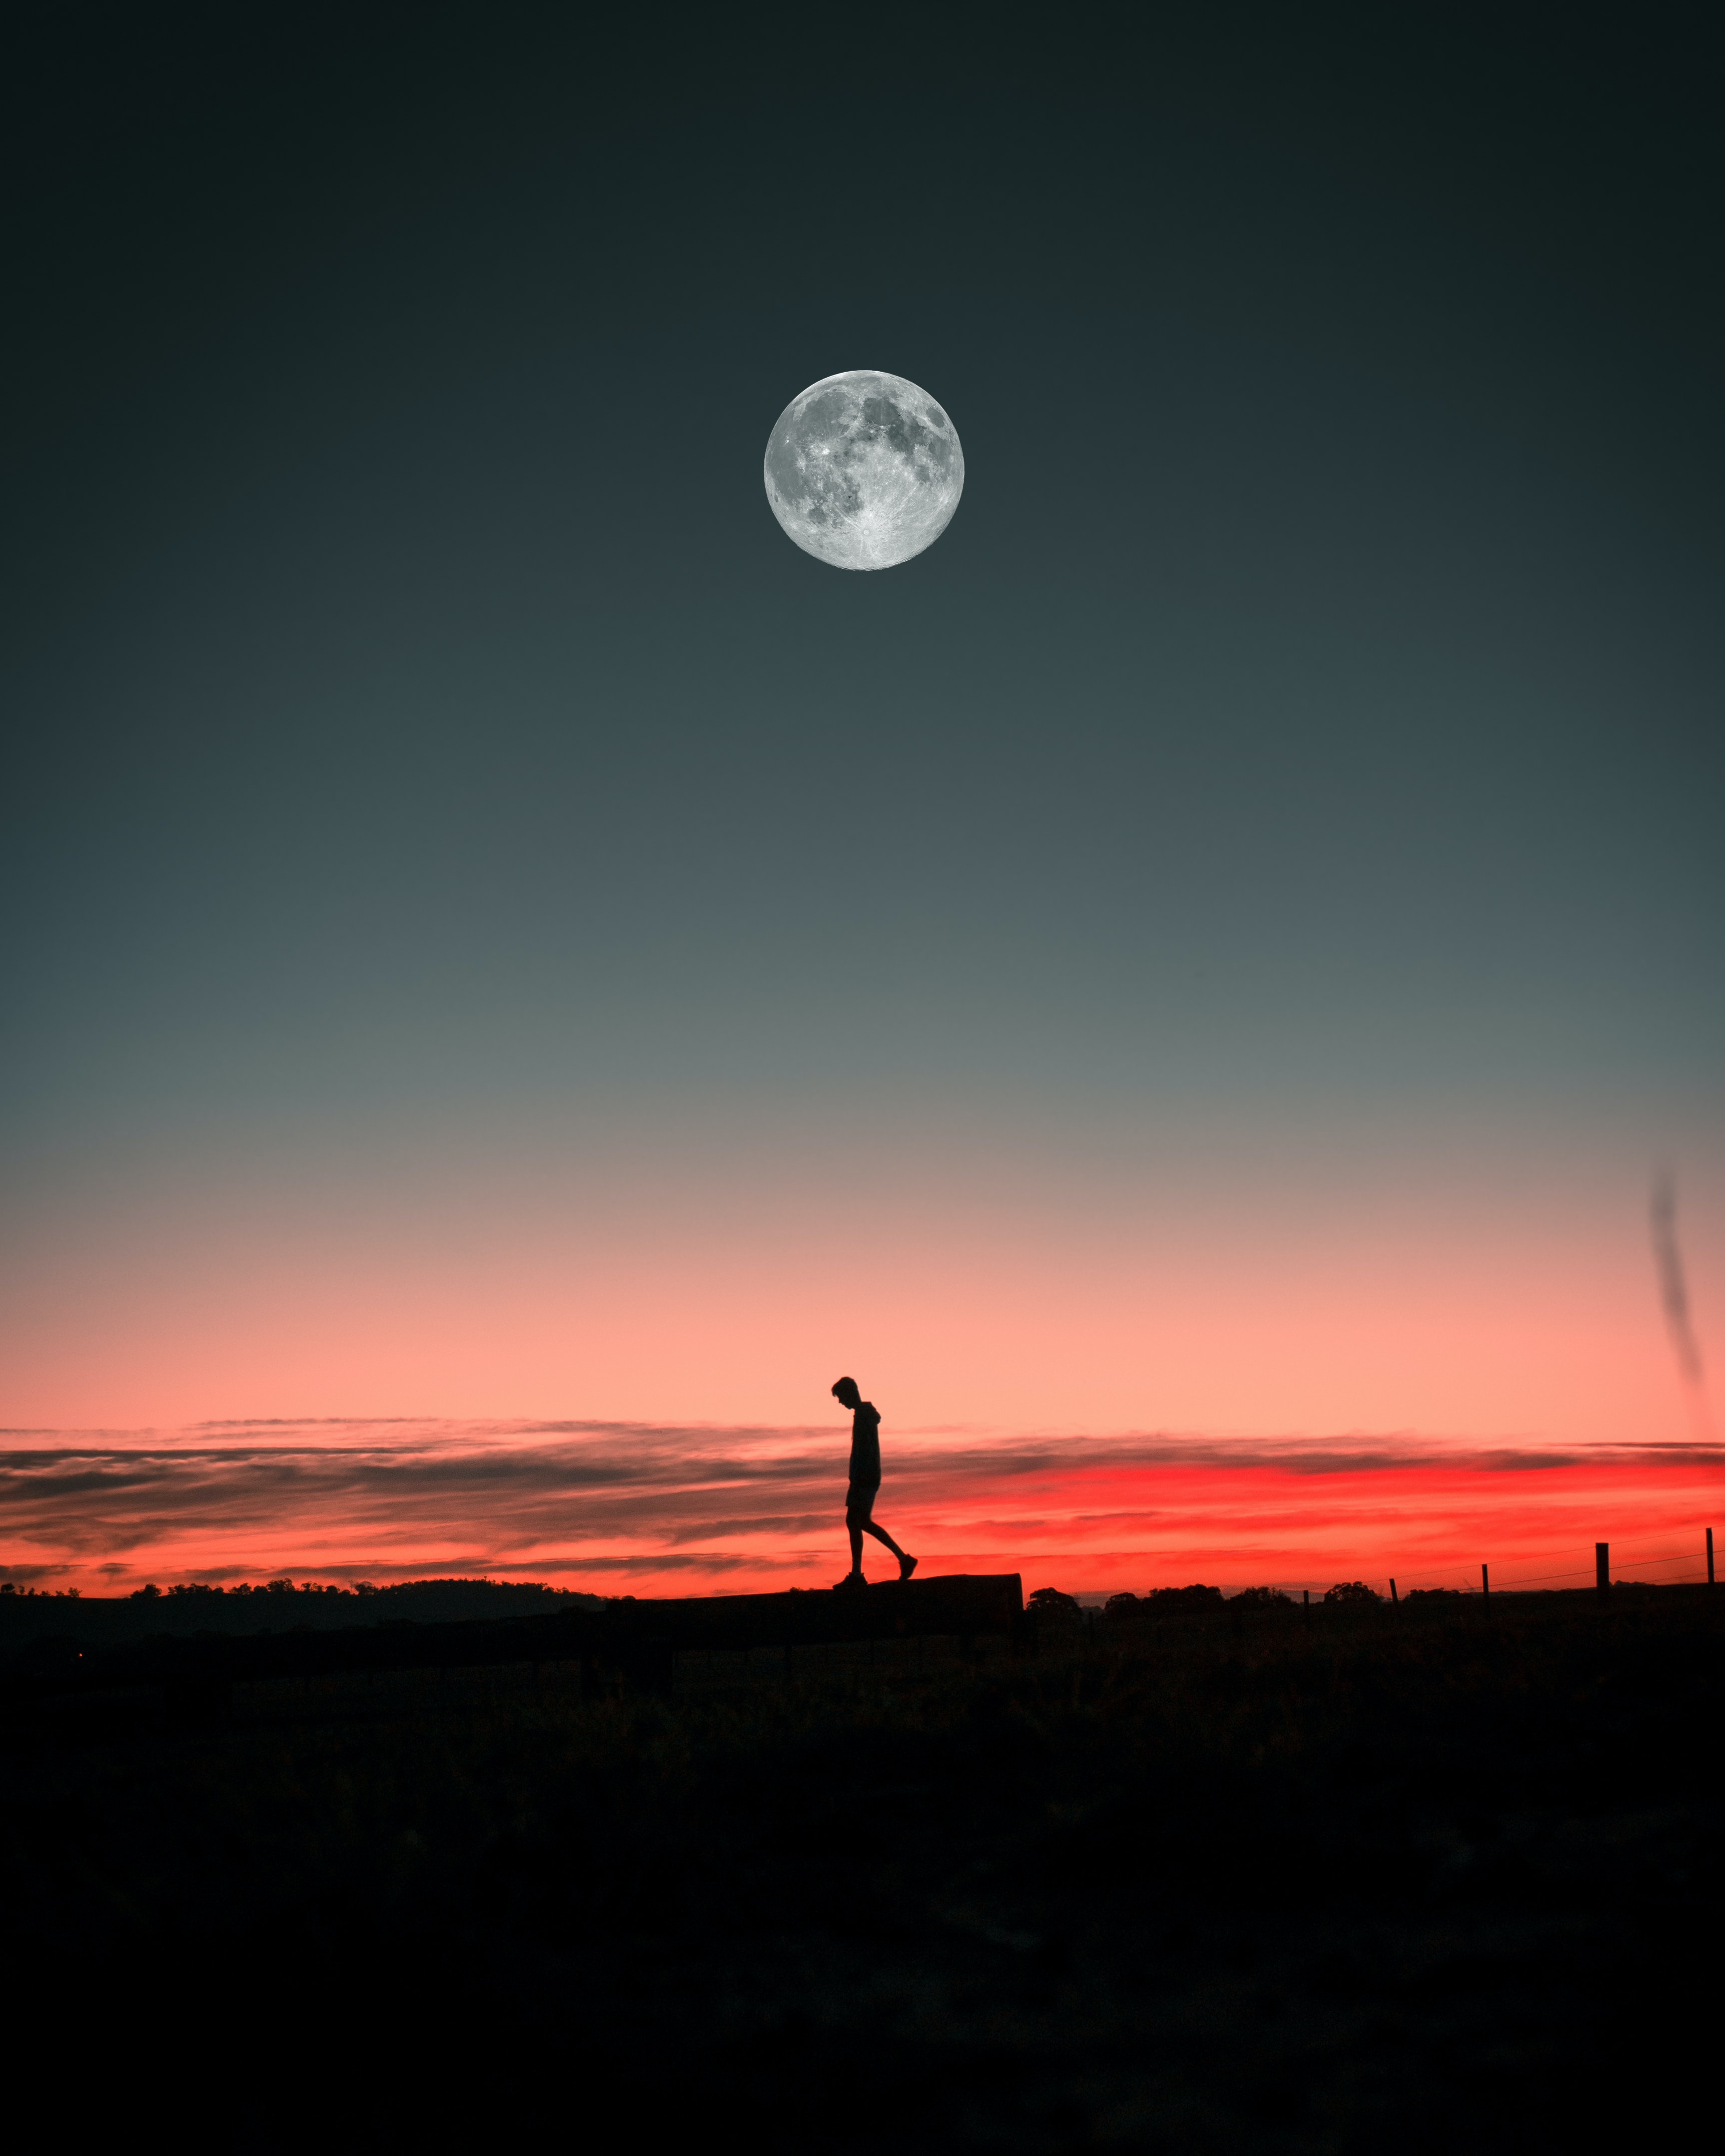 android alone, moon, lonely, loneliness, silhouette, sunset, miscellanea, miscellaneous